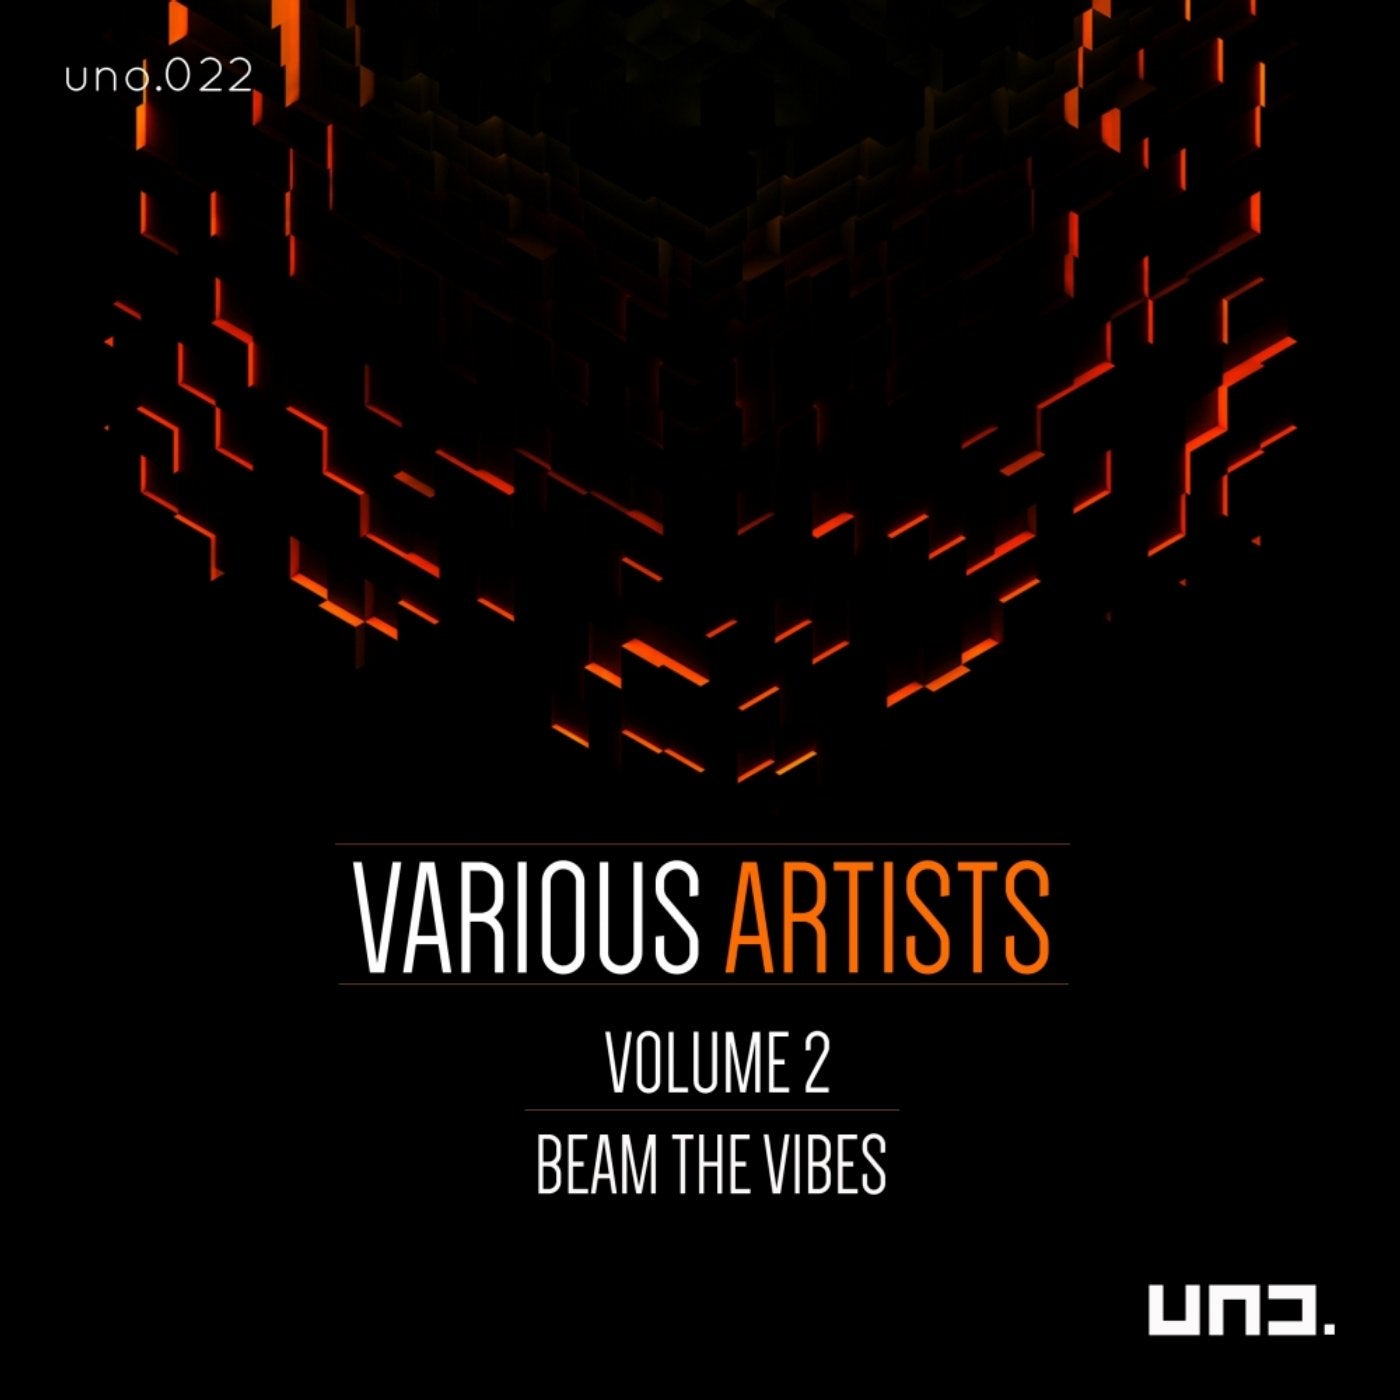 Uno. (Beam The Vibes), Vol. 2